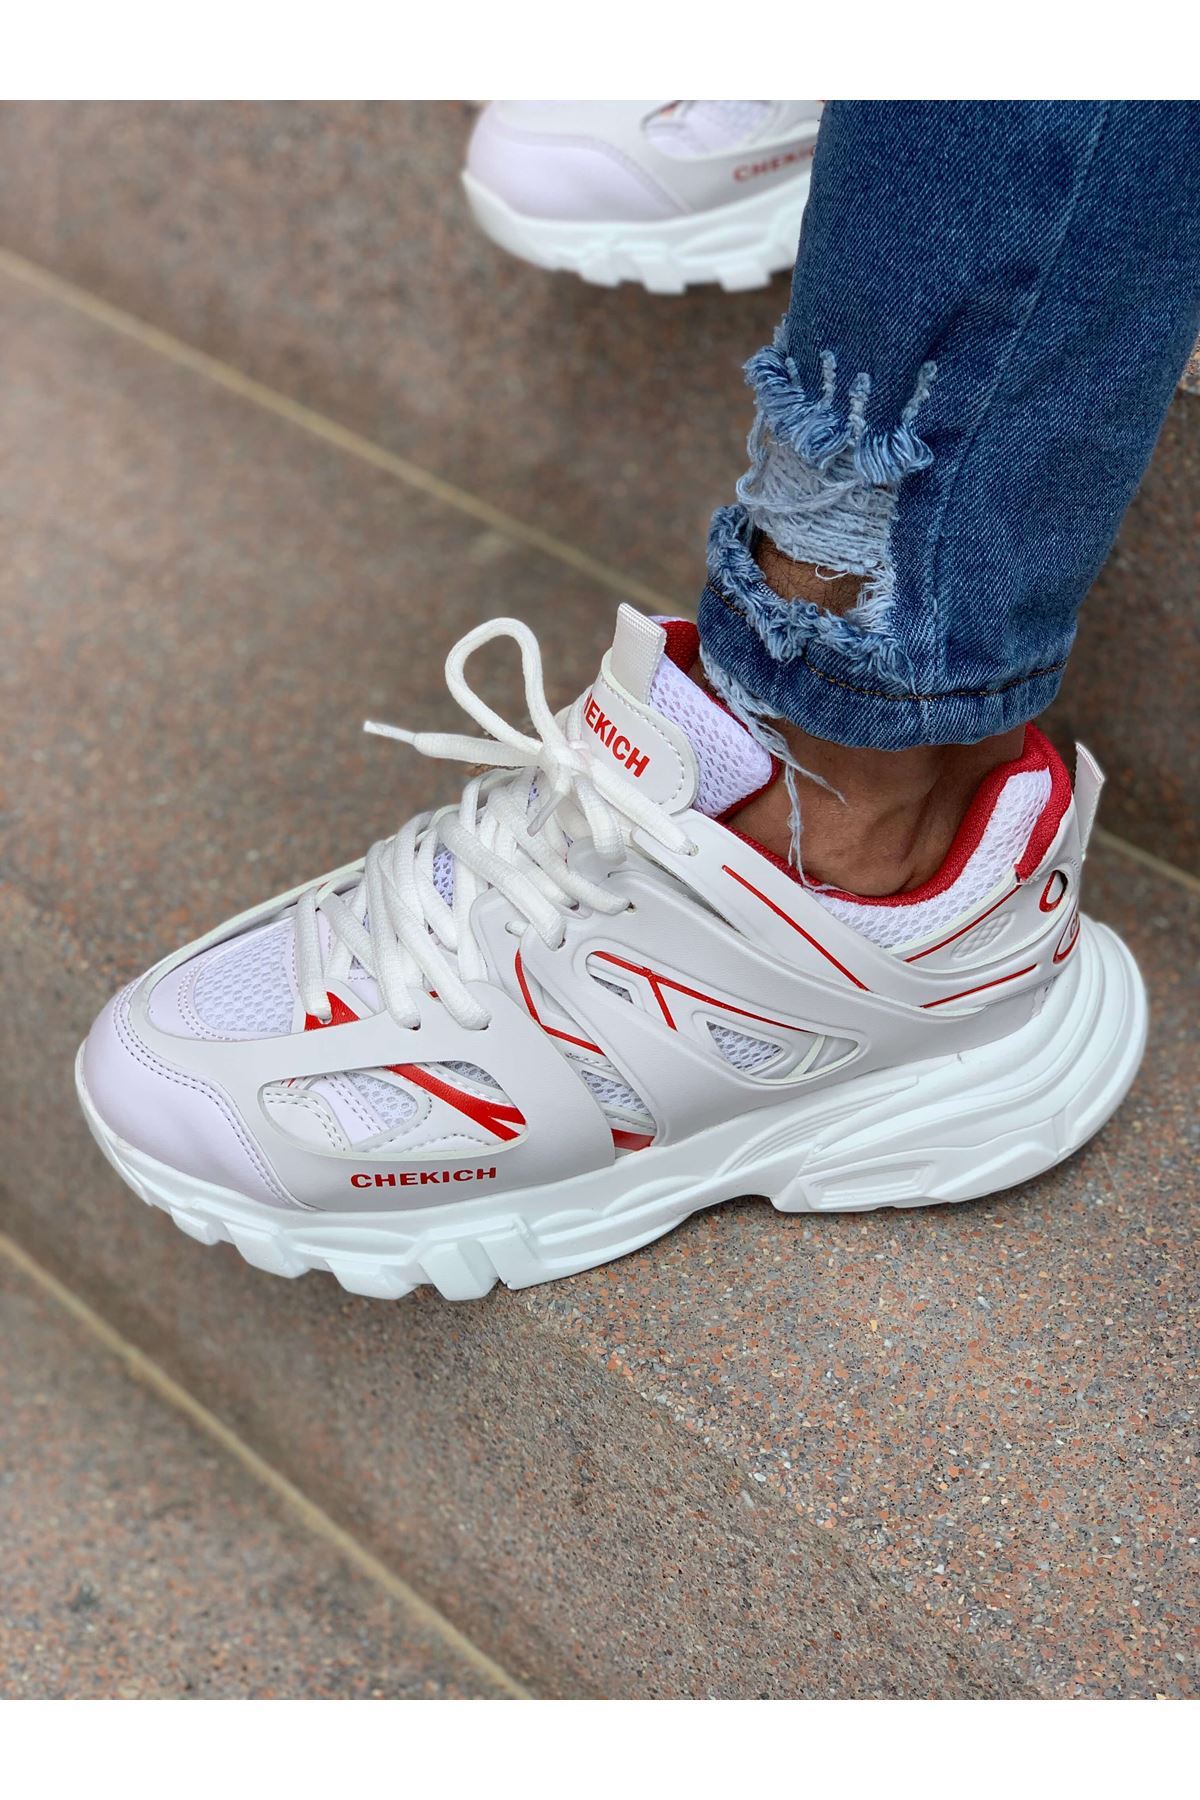 Chekich Men's Shoes White Red Artificial Leather Summer Season Lace Up Sneakers Mixed Color Casual Comfortable Training Flexible Orthopedic Sportive Lightweight High Outsole New Arrival Breathable Outdoor Male CH301 V4